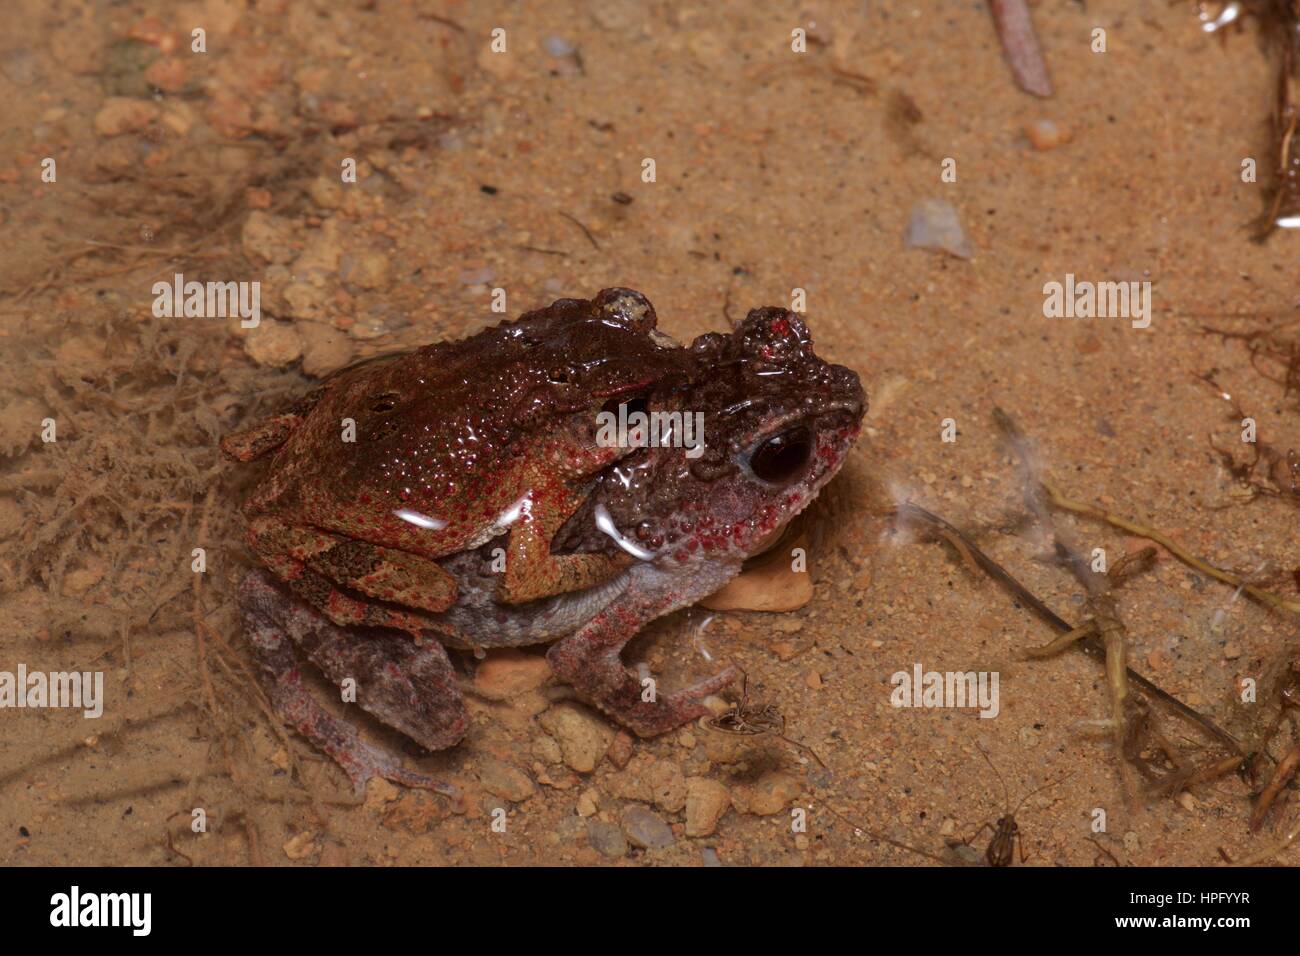 A pair of Lesser Stream Toads (Ingerophrynus parvus) in a shallow puddle in Ulu Semenyih, Selangor, Malaysia Stock Photo